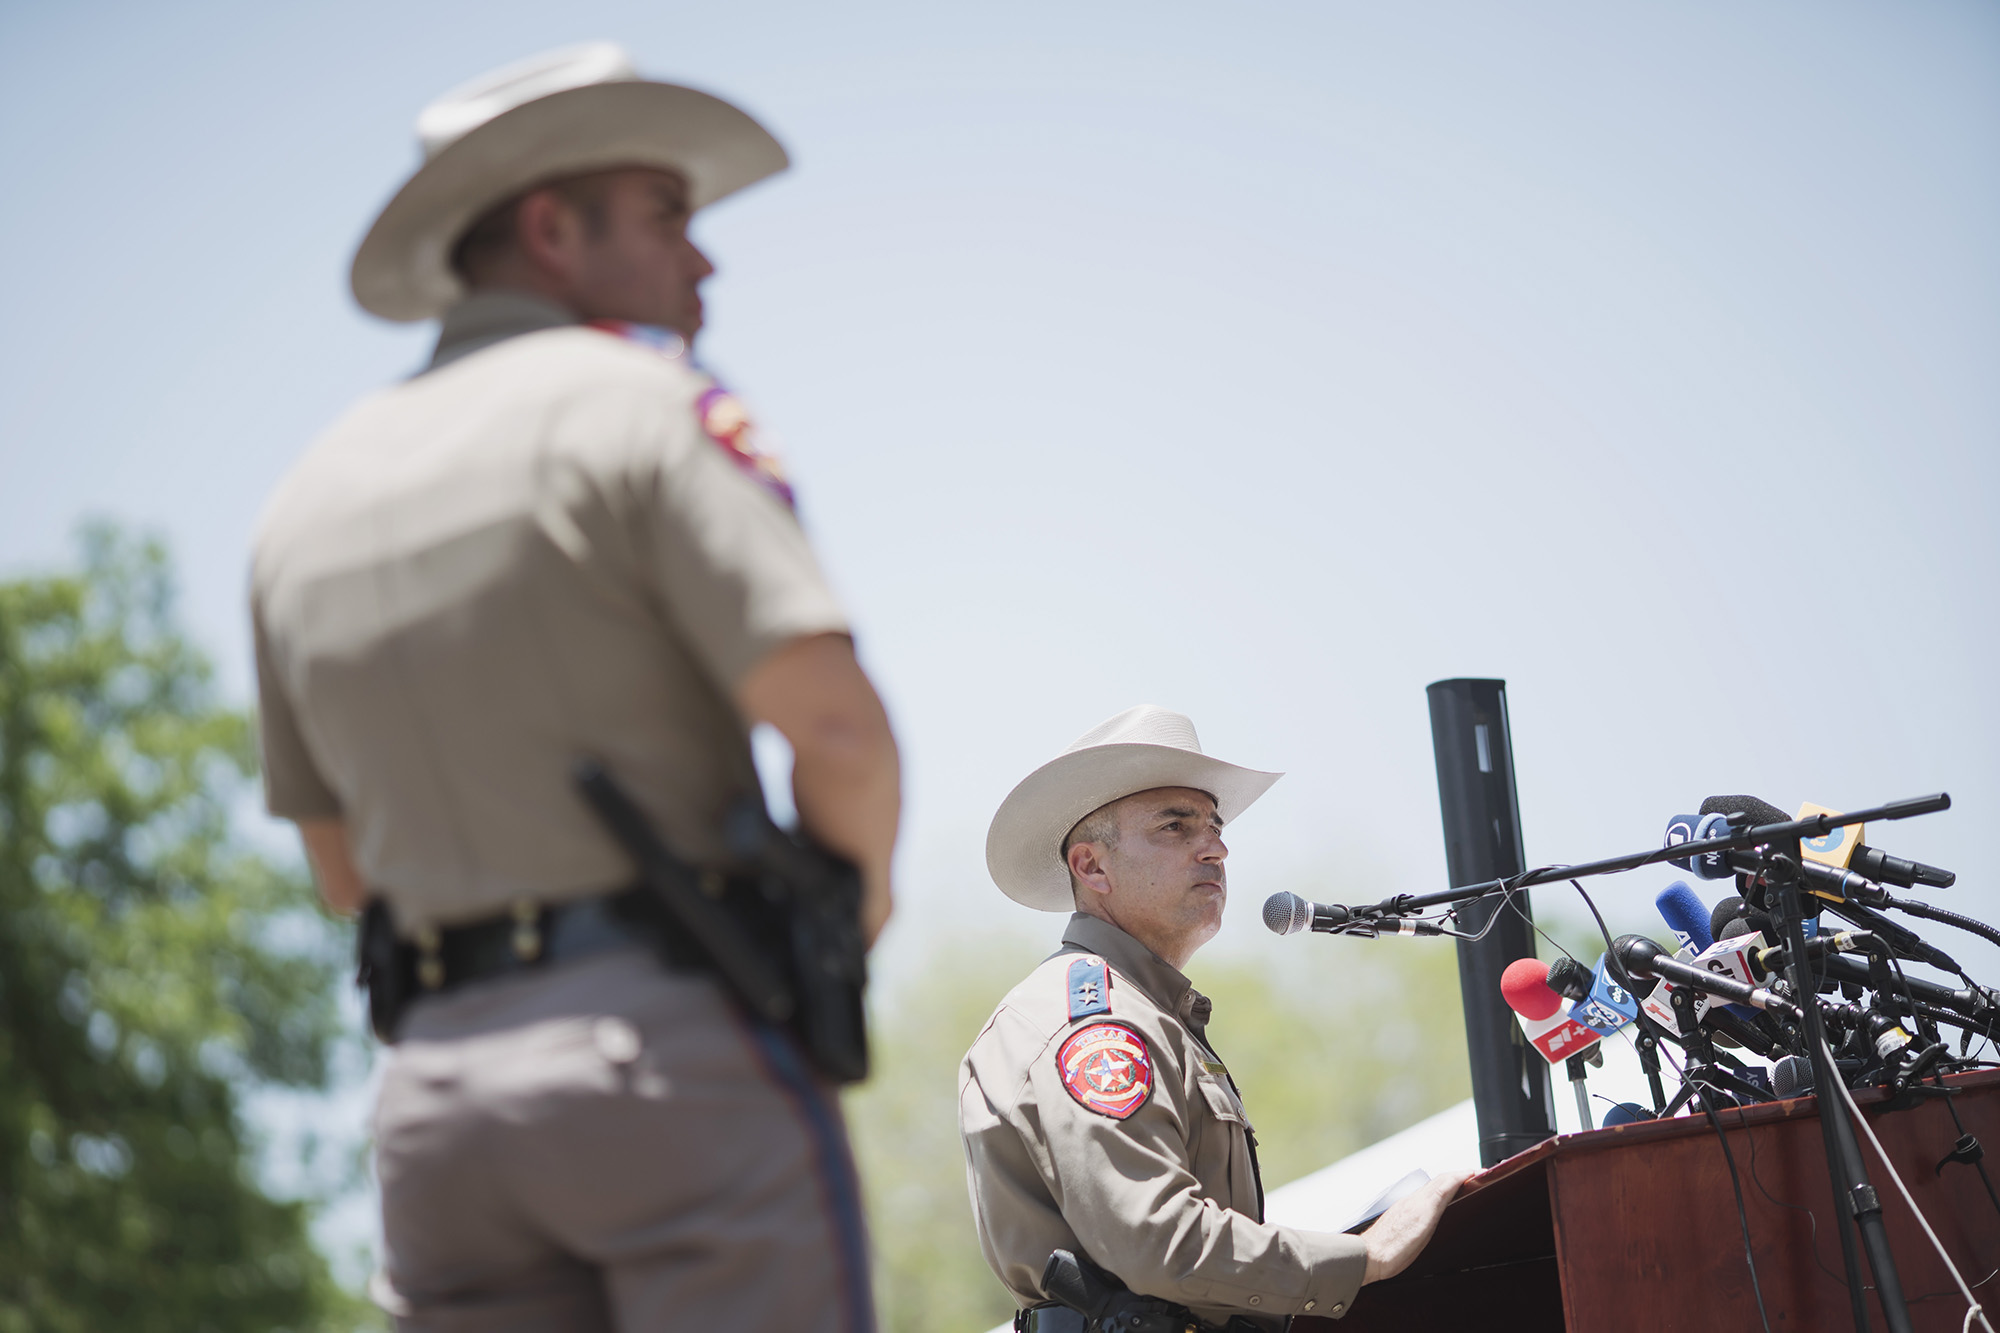 Victor Escalon, Regional Director of the Texas Department of Public Safety South, speaks during a press conference in Uvalde, Texas on May 26.